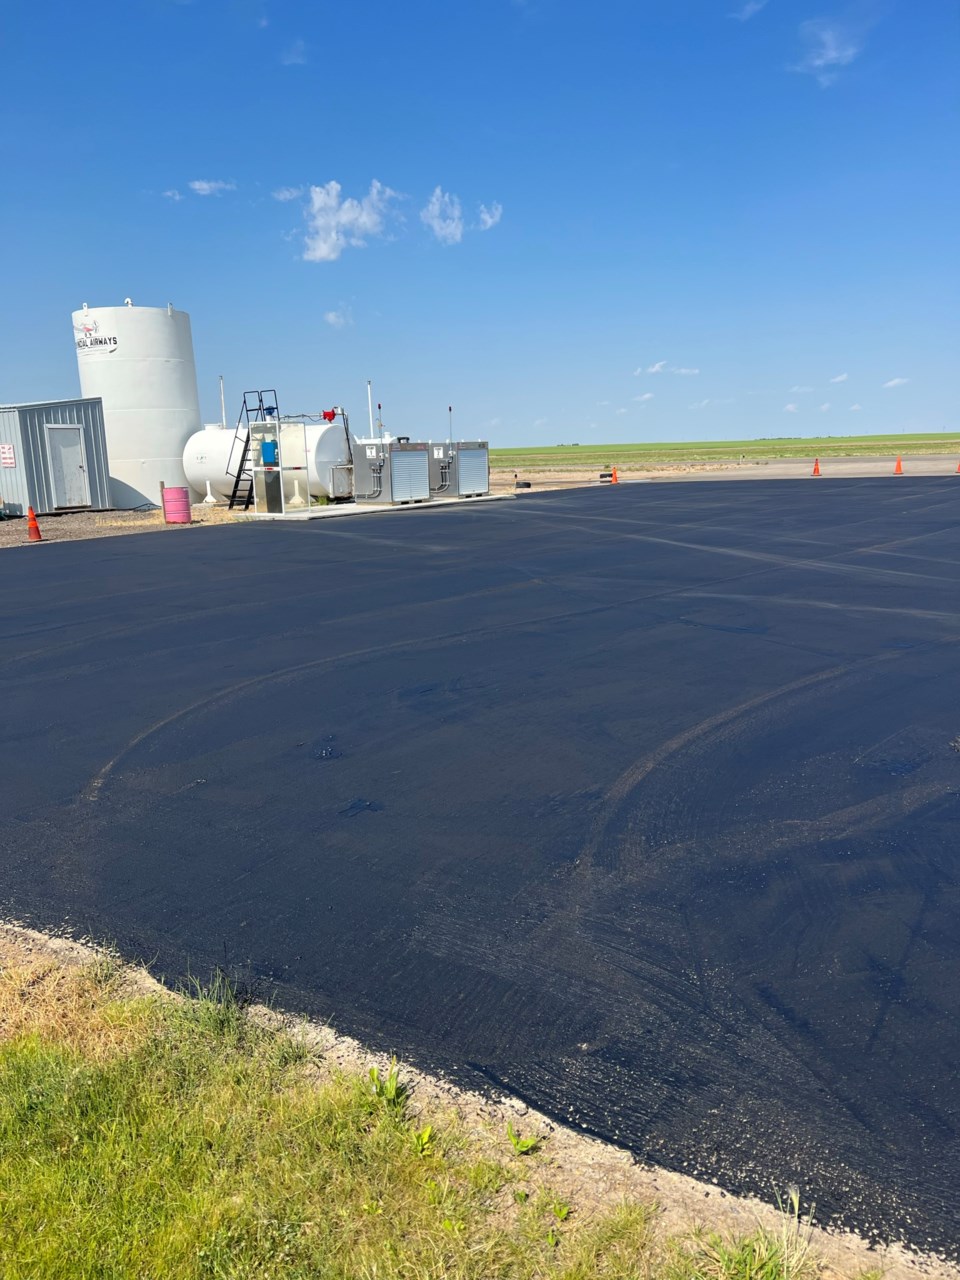 last-year-community-airport-partnership-funding-of-50000-was-used-for-crack-sealing-on-the-moose-jaw-municipal-airport-apron